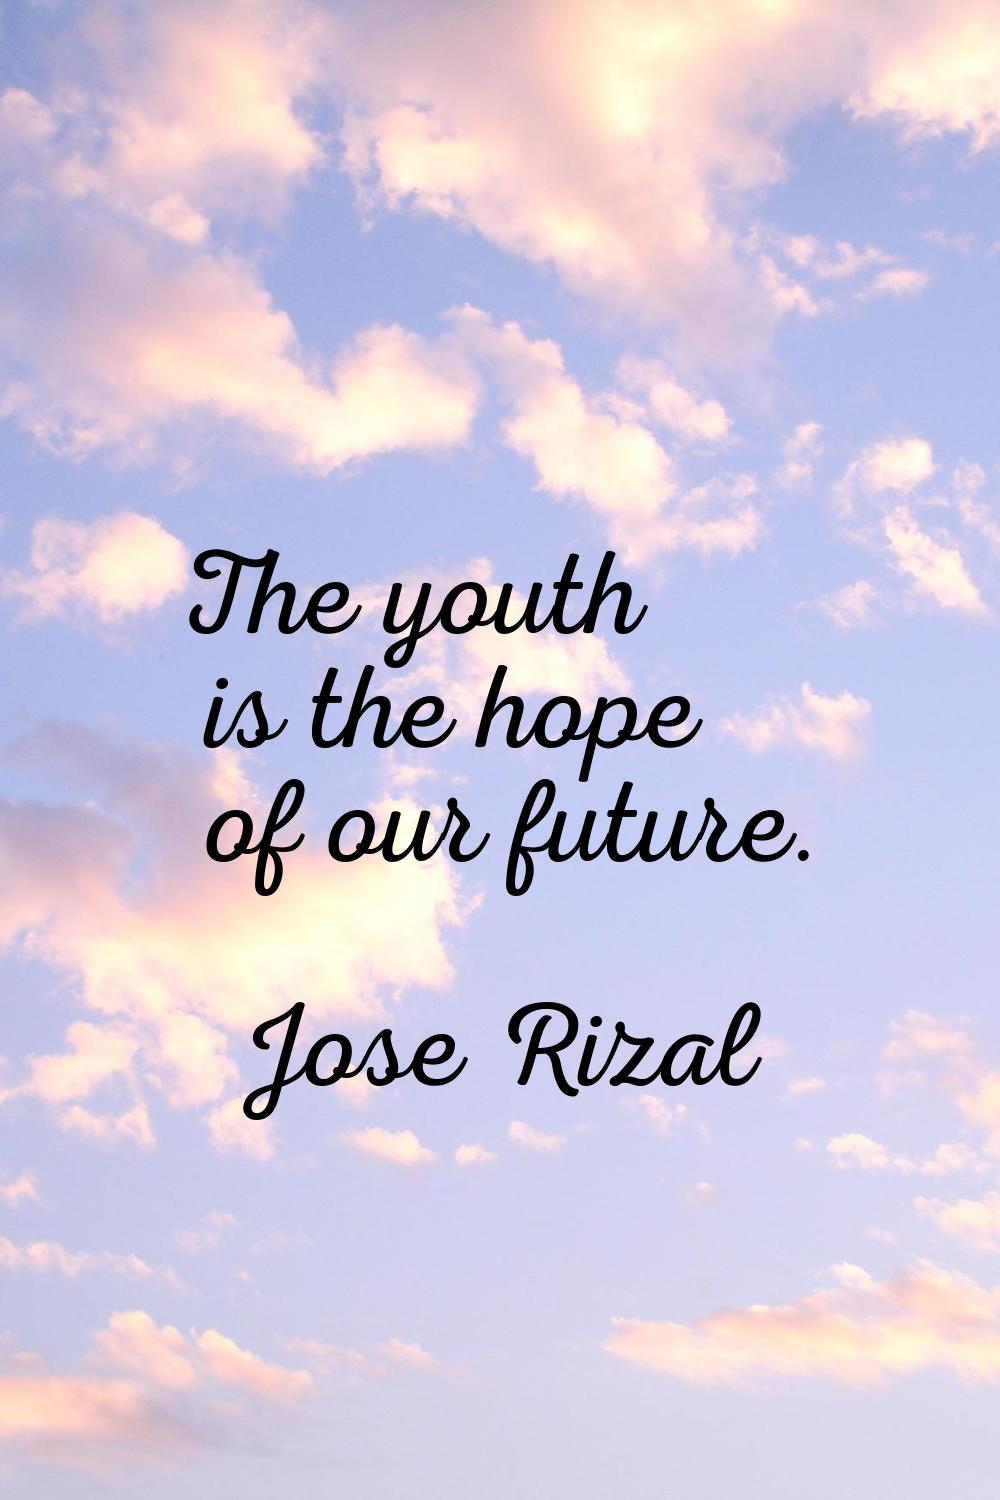 The youth is the hope of our future.